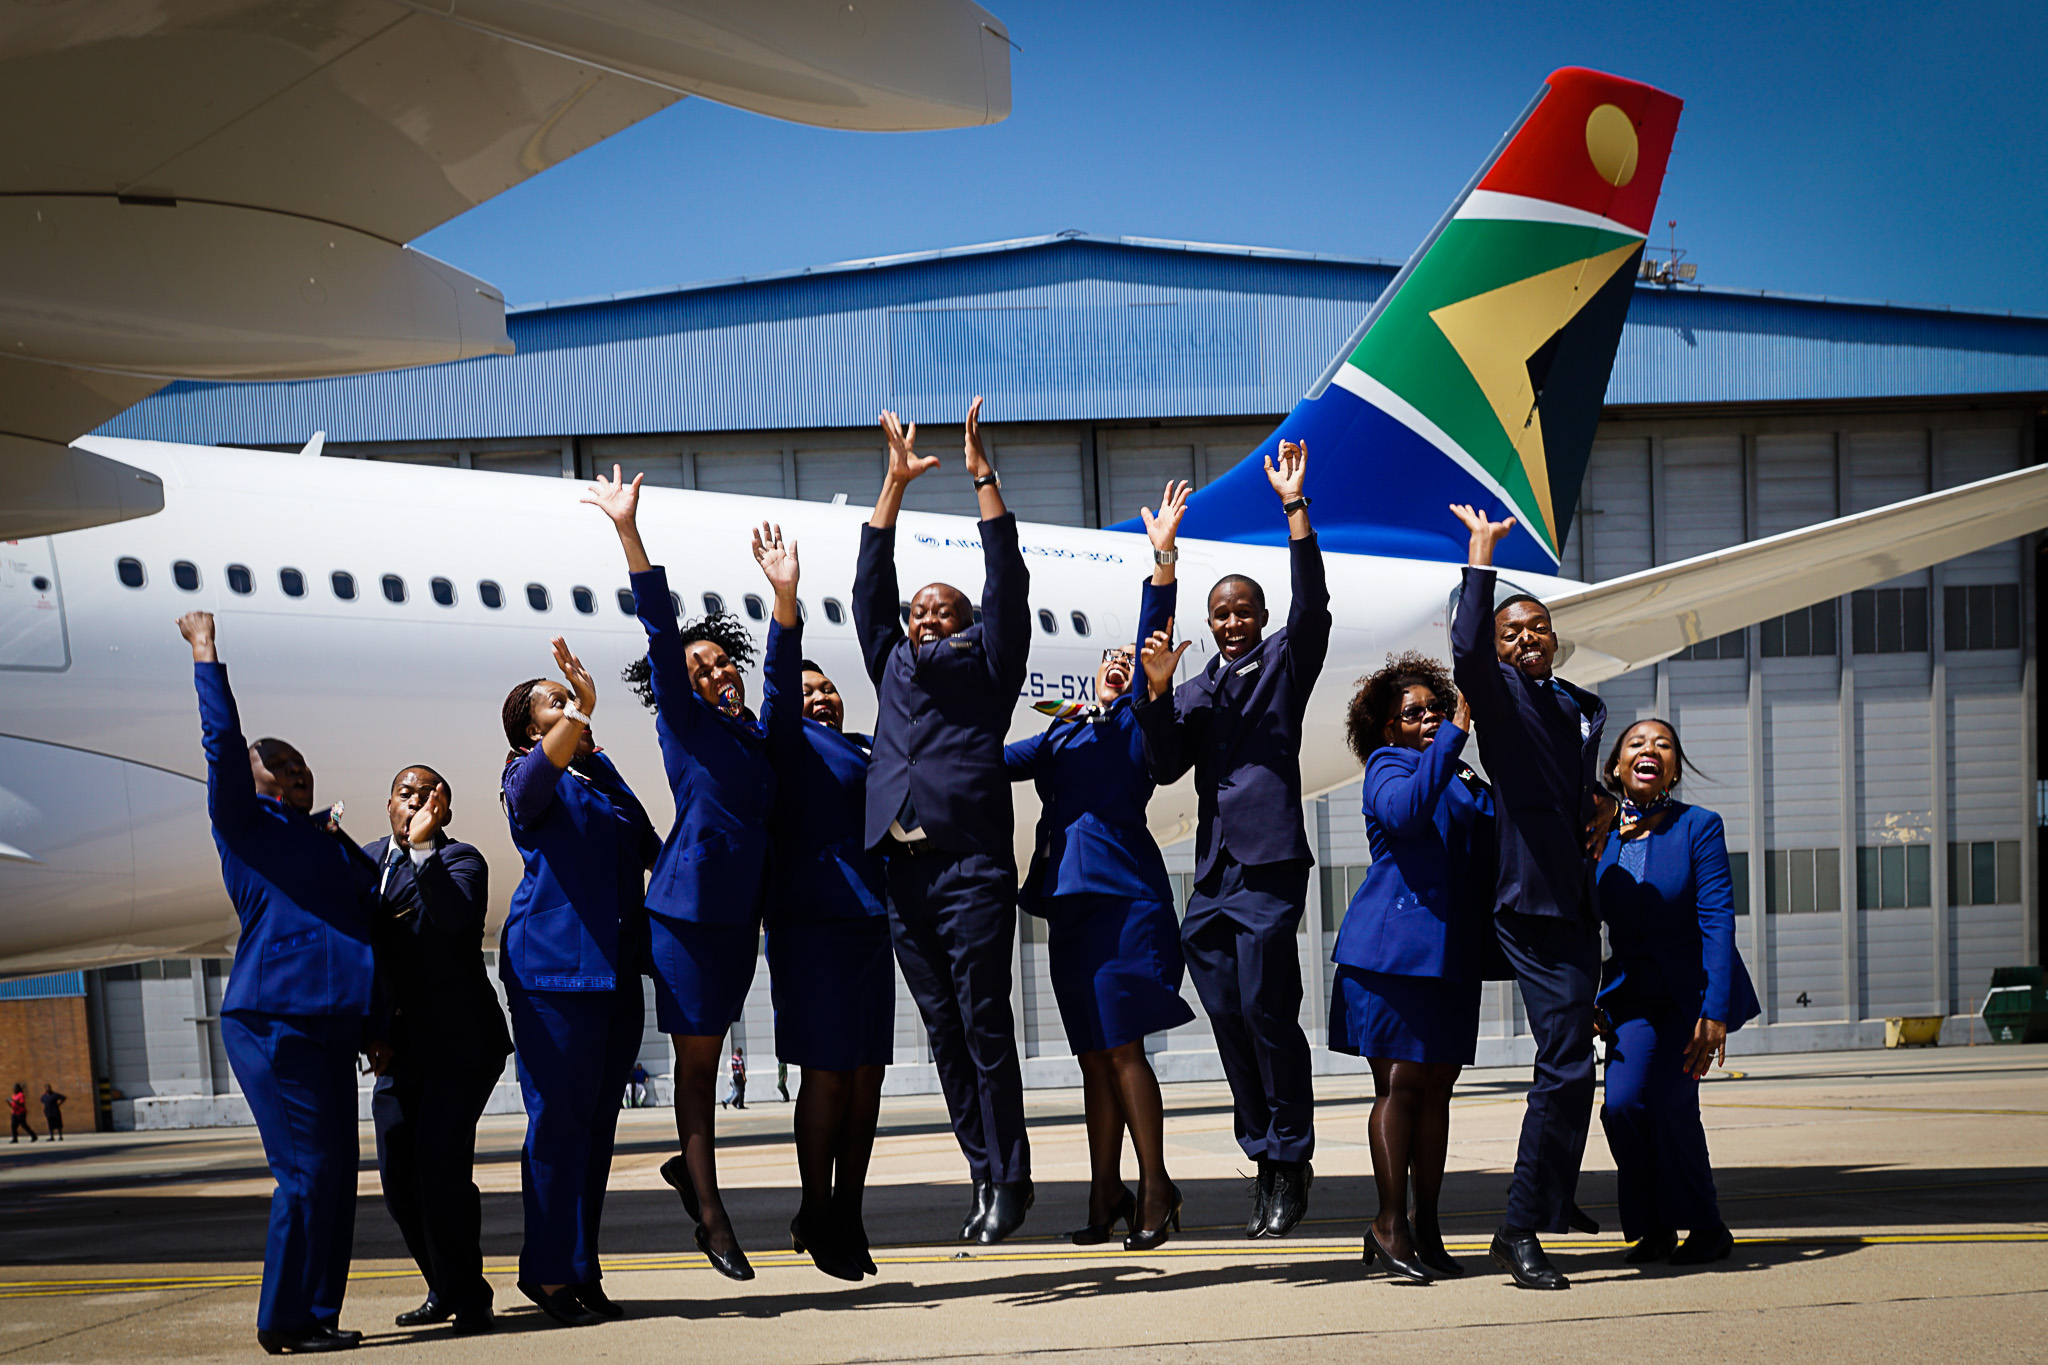 a group of people in blue uniforms standing in front of an airplane